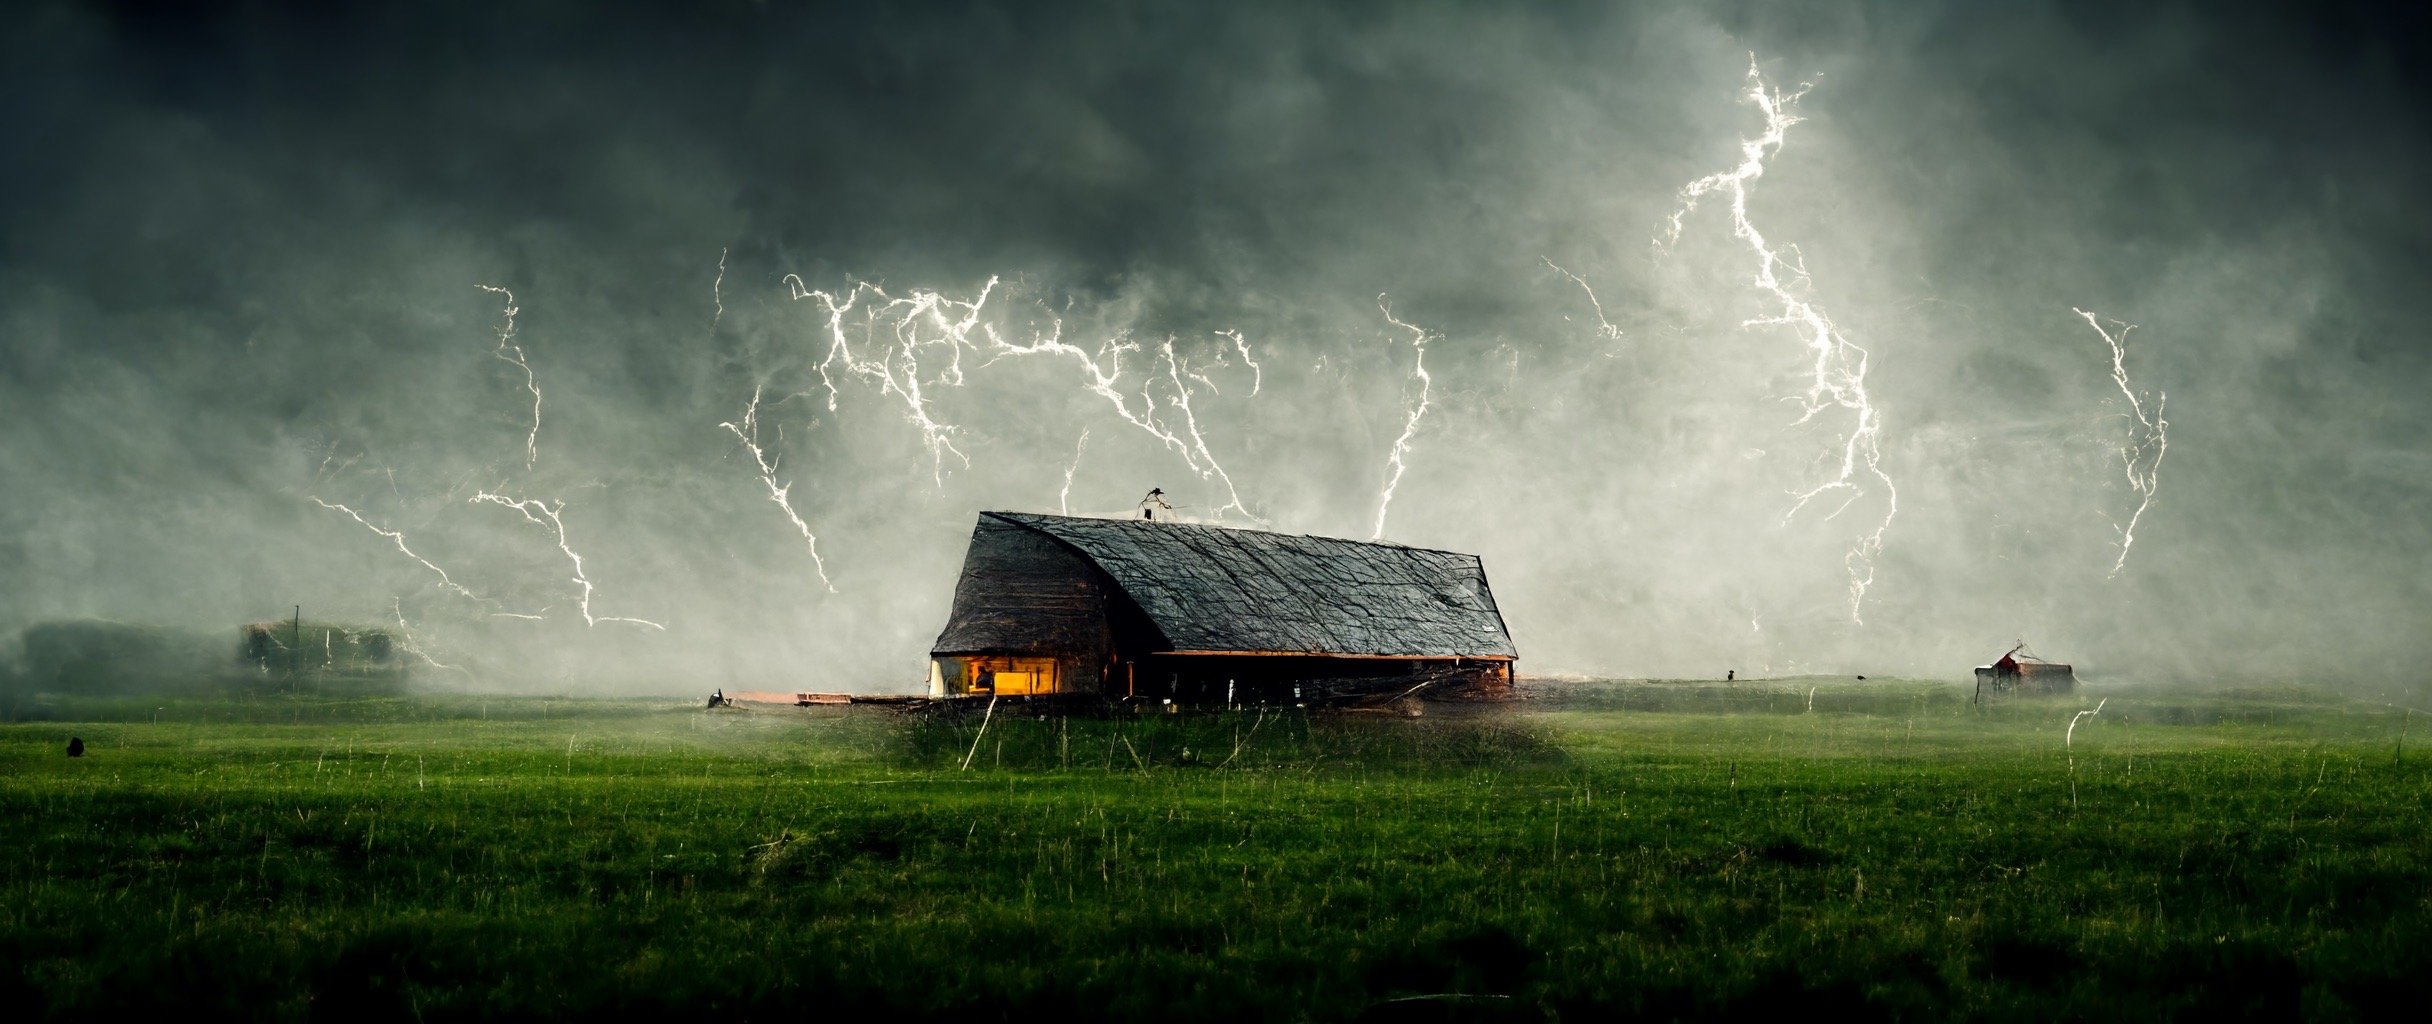 aaa592ef-9f23-471a-89ae-729bd3f3e4ab_S3RAPH_farmland_with_1_barn_lonely_in_an_epic_lightning_storm._Cinematic_composition_render_w_2048_h__858.JPG